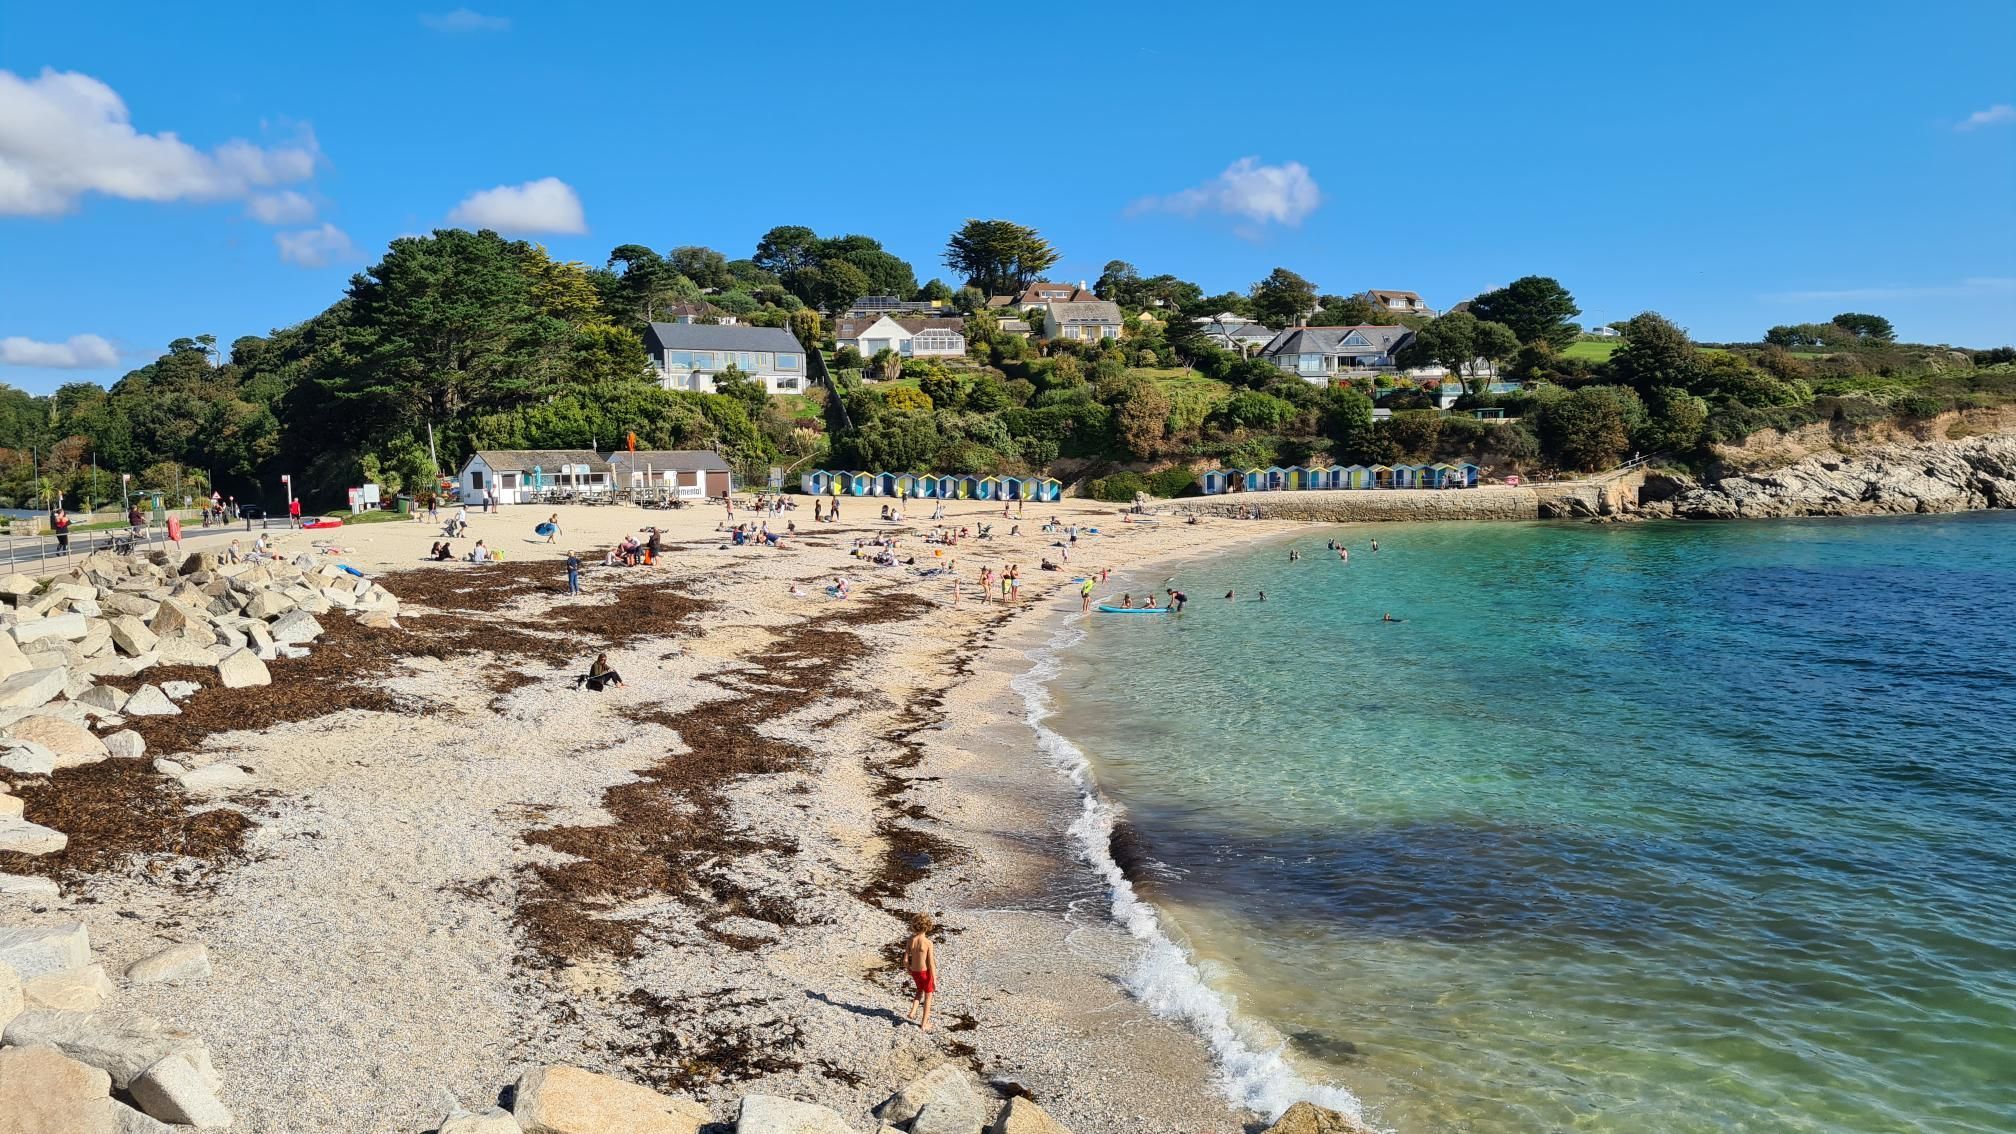 Some people decided to make the most of the sunny bank holiday by going to the beach instead at Swanpool in Falmouth